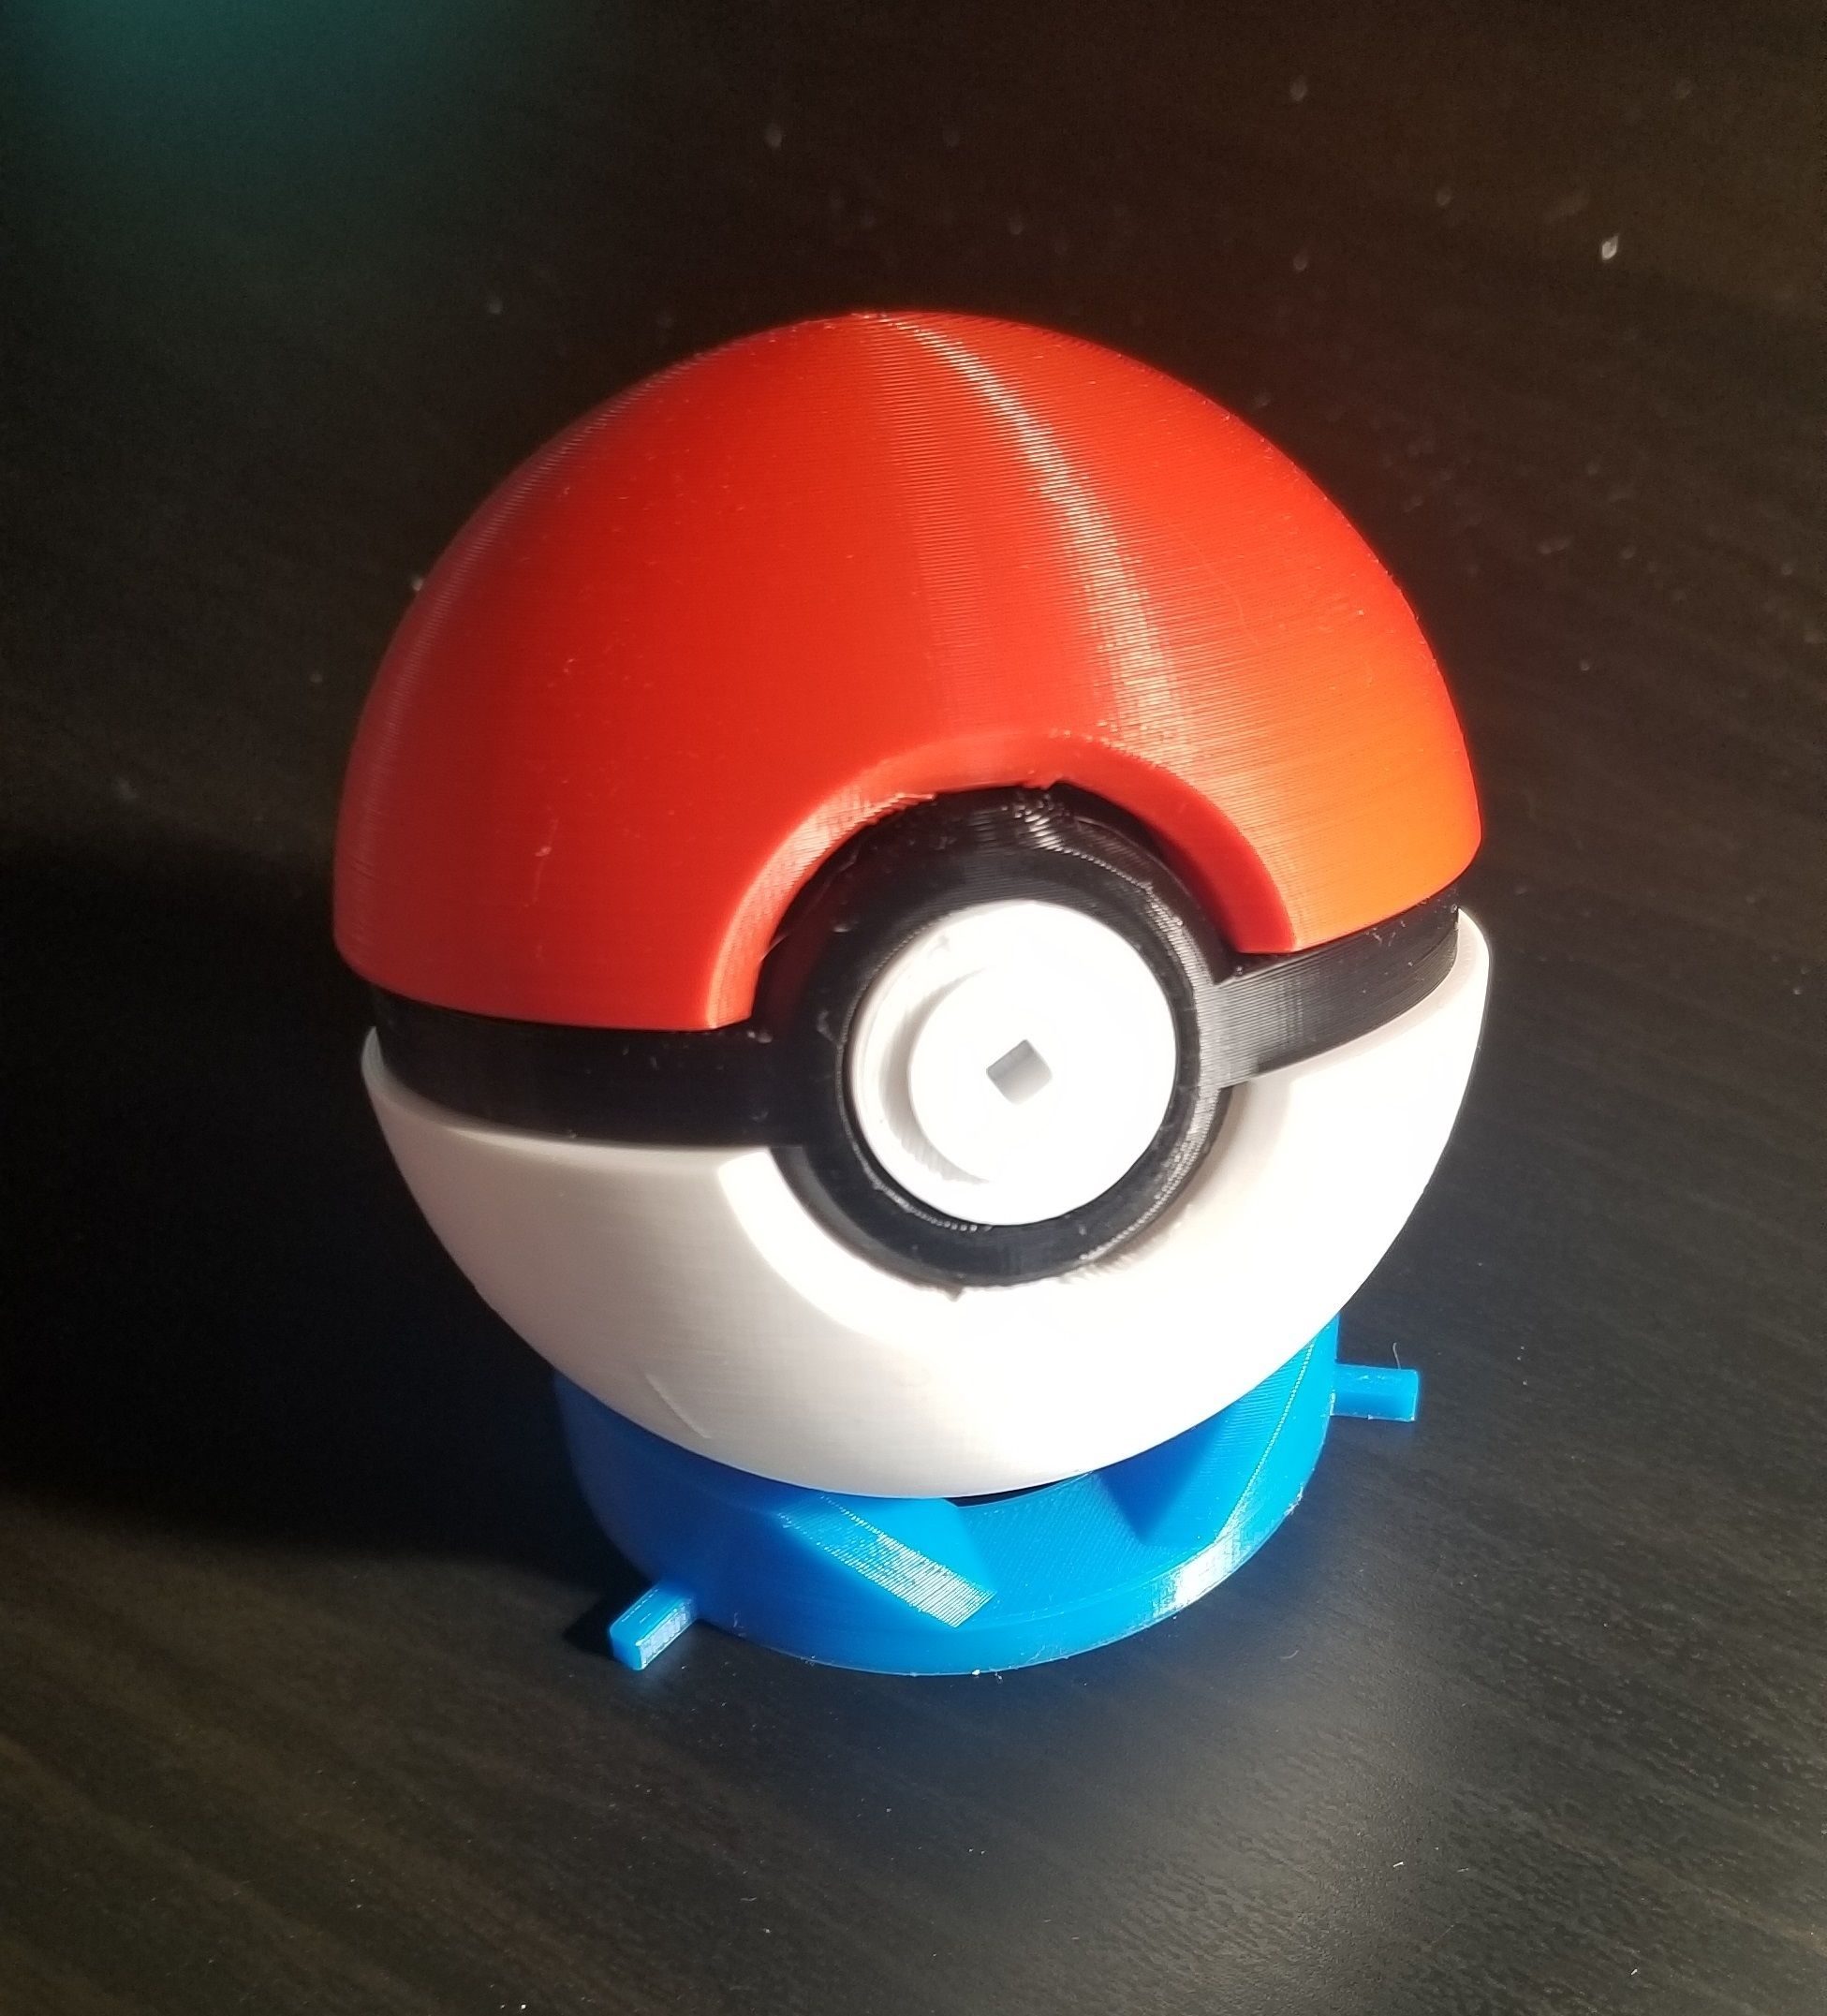 20200923_122906.jpg Download free file Pokeball Puzzle • Object to 3D print, 3DPrintersaur